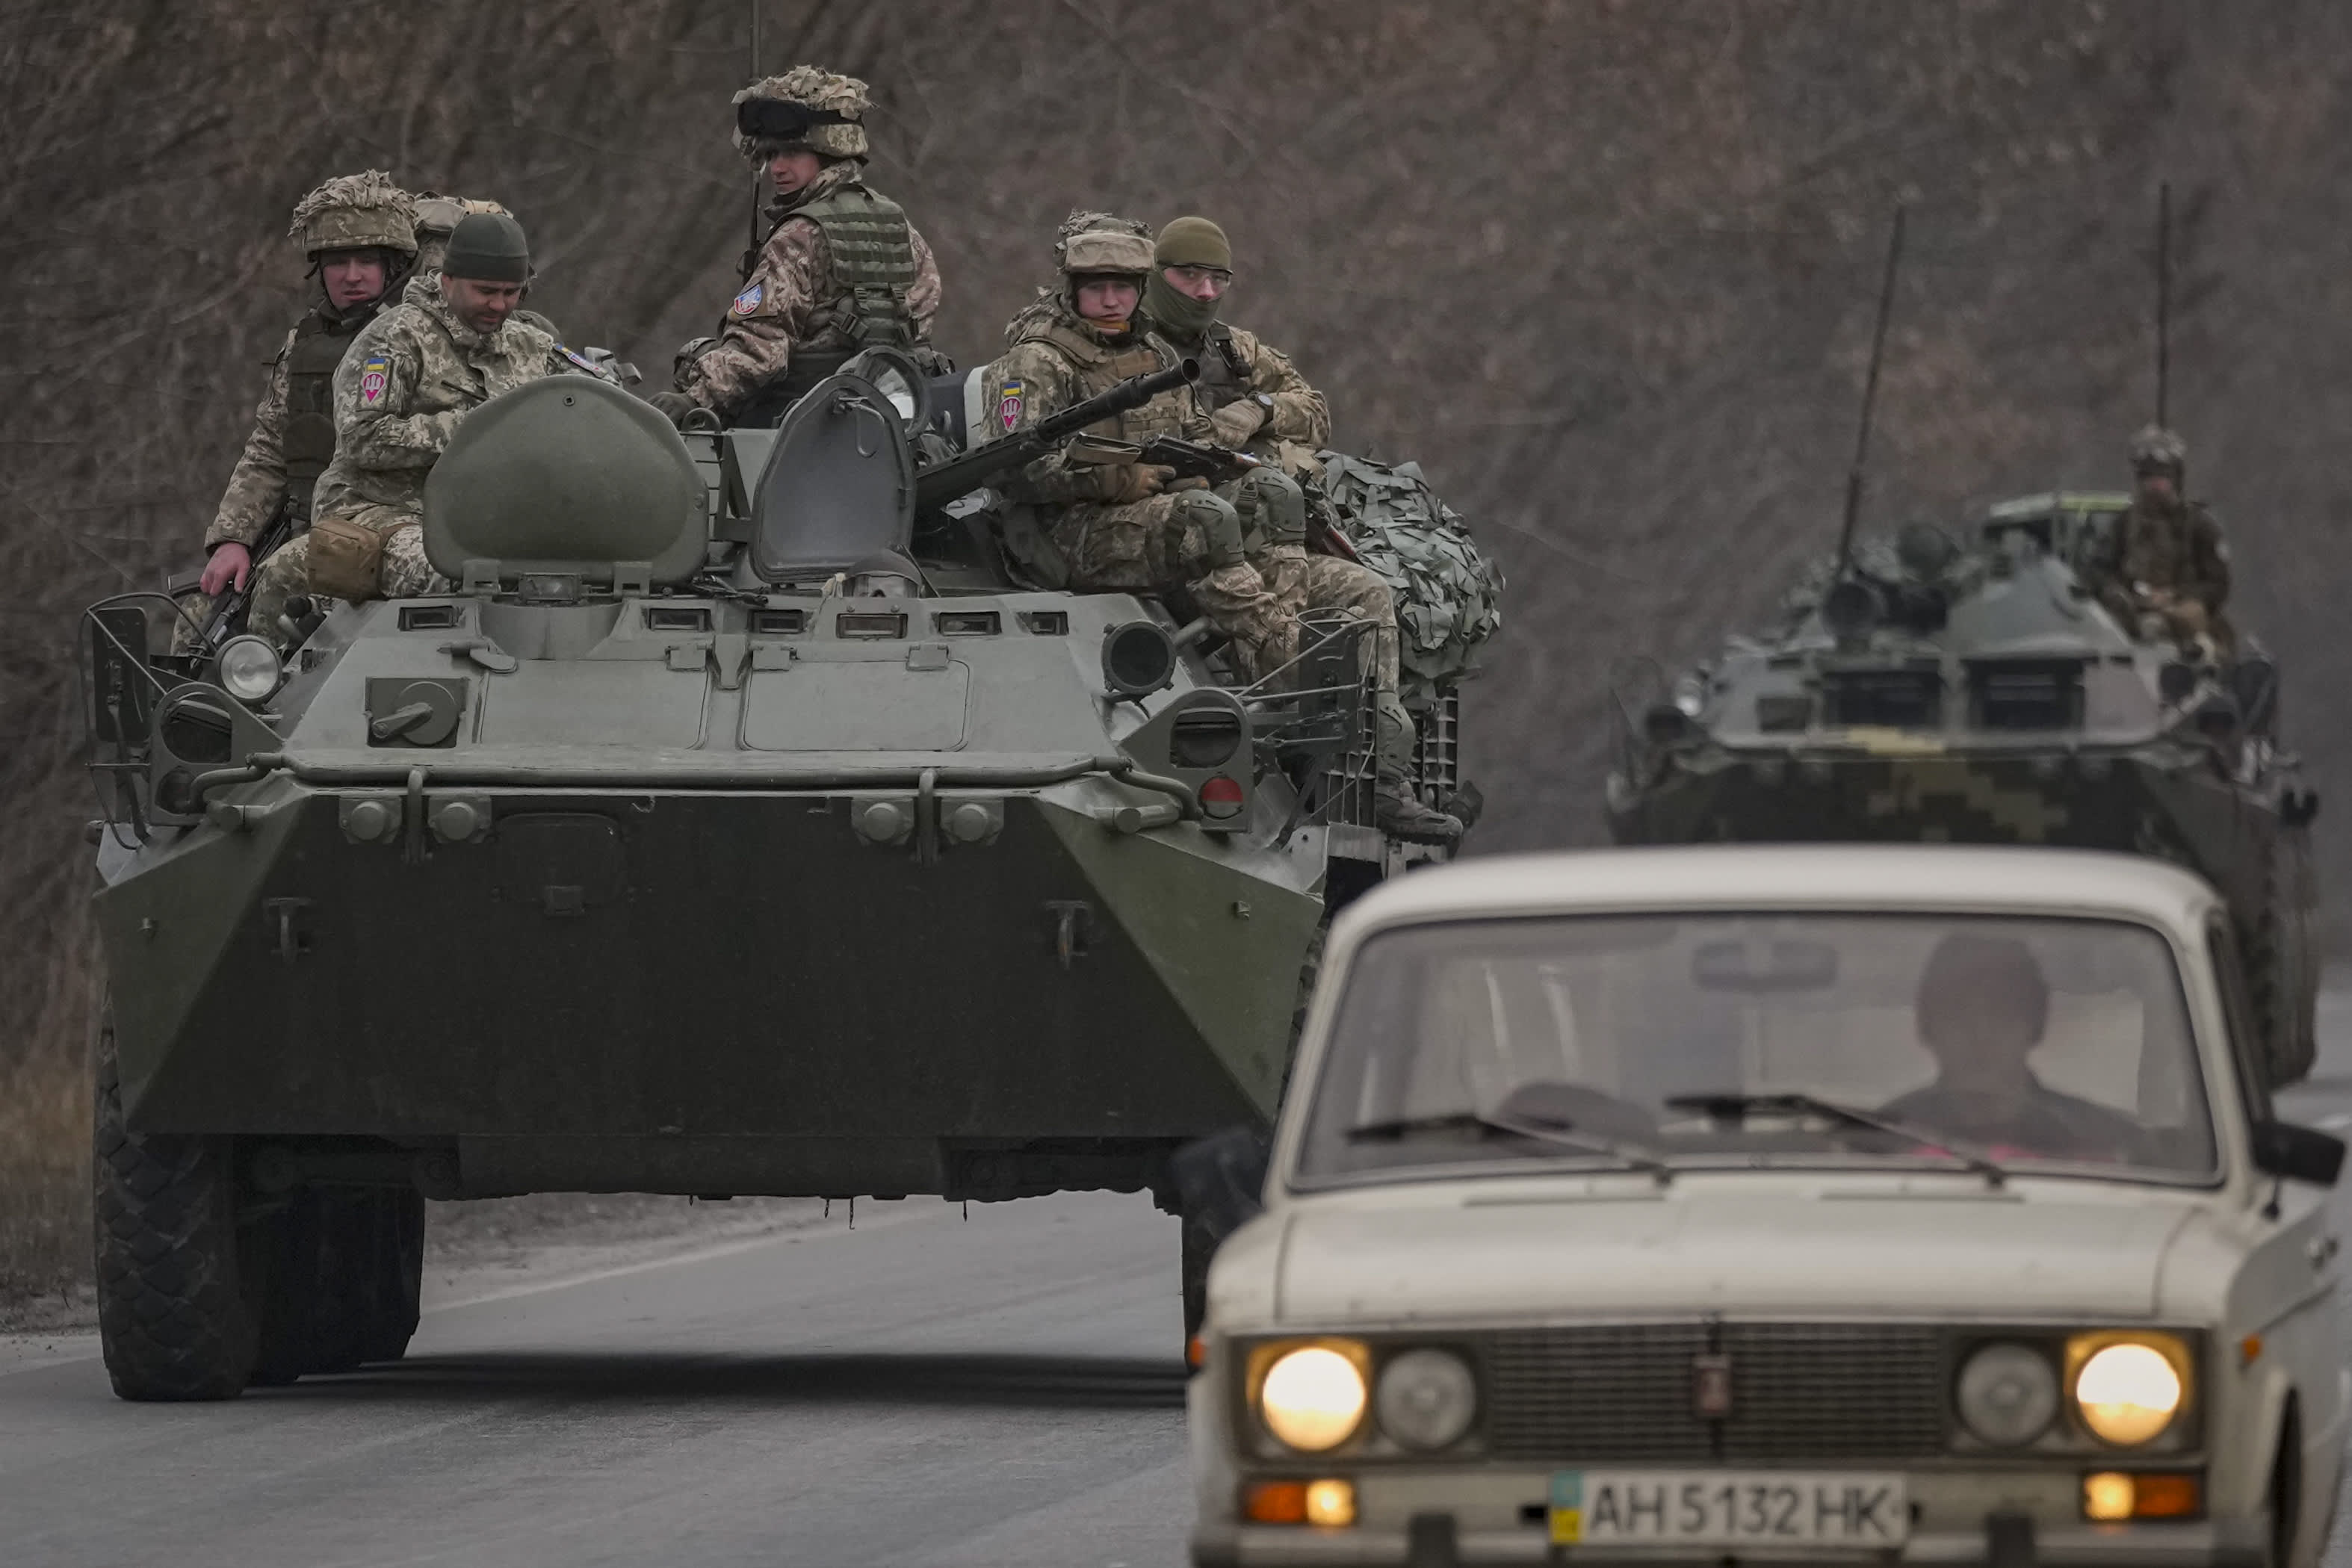 Bitcoin donations to Ukrainian military soar as Russia invades